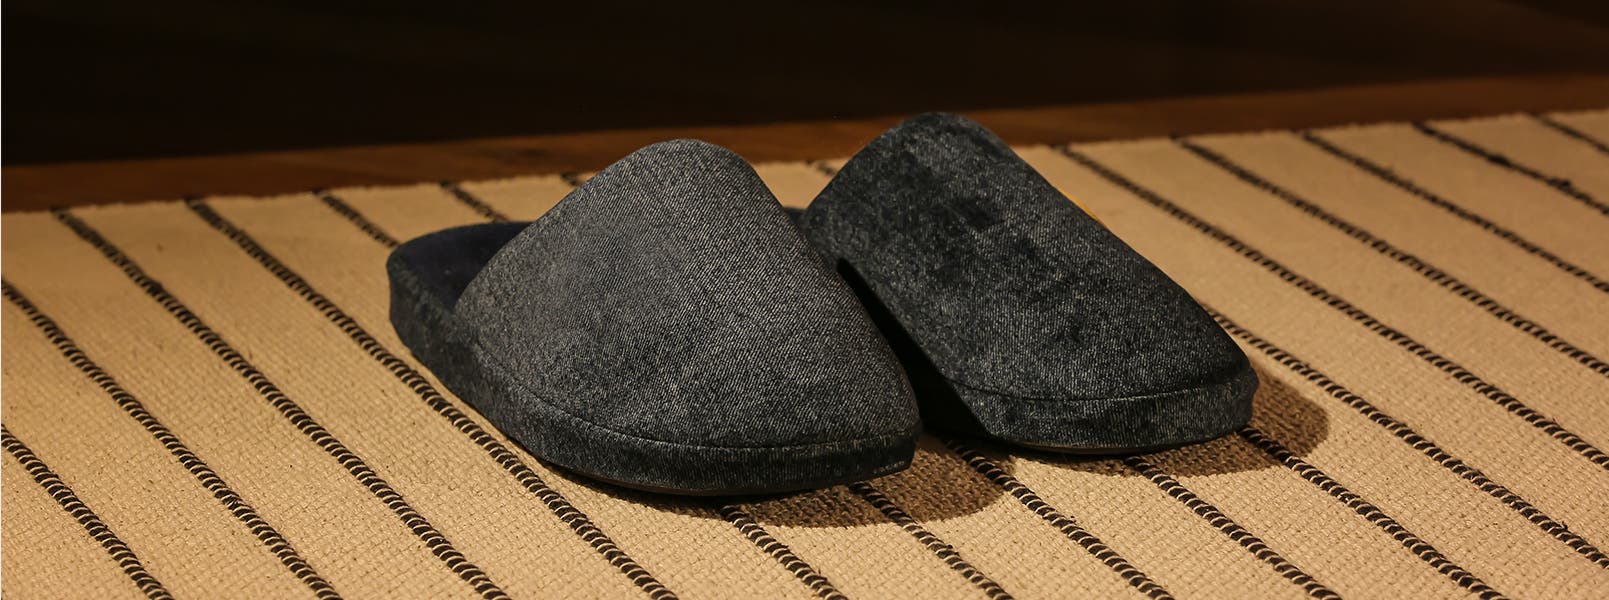 A pair of black slippers.